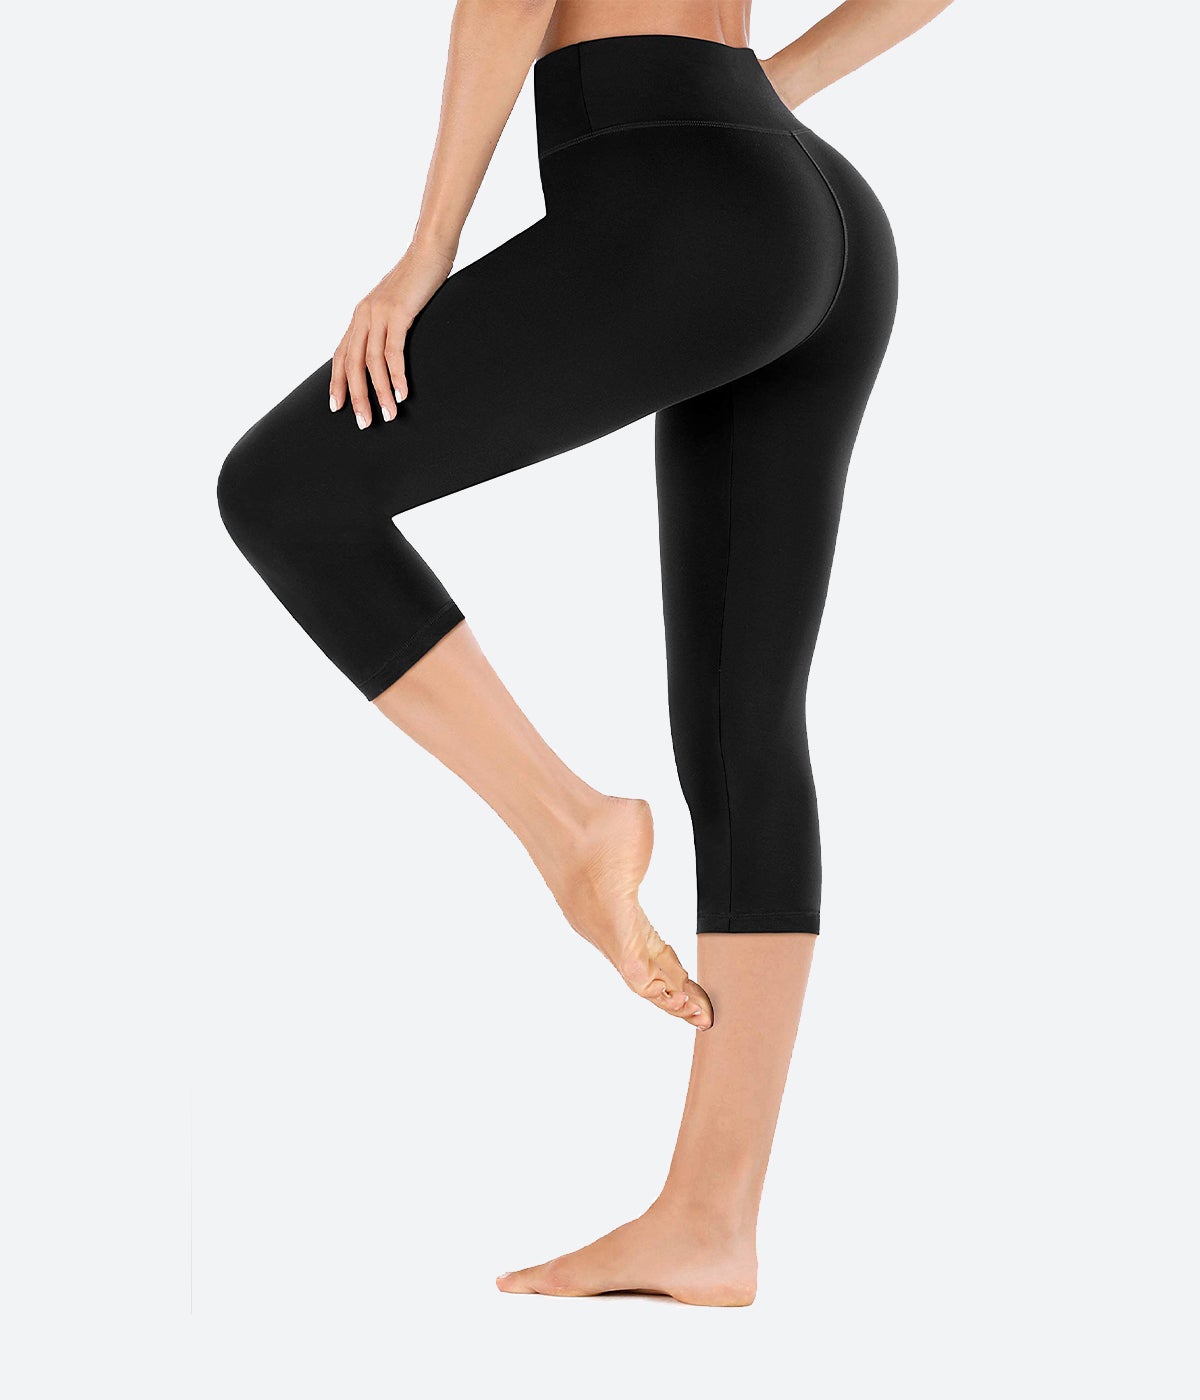 2 Pack Heathyoga High Waisted Yoga Leggings Pants for Women with